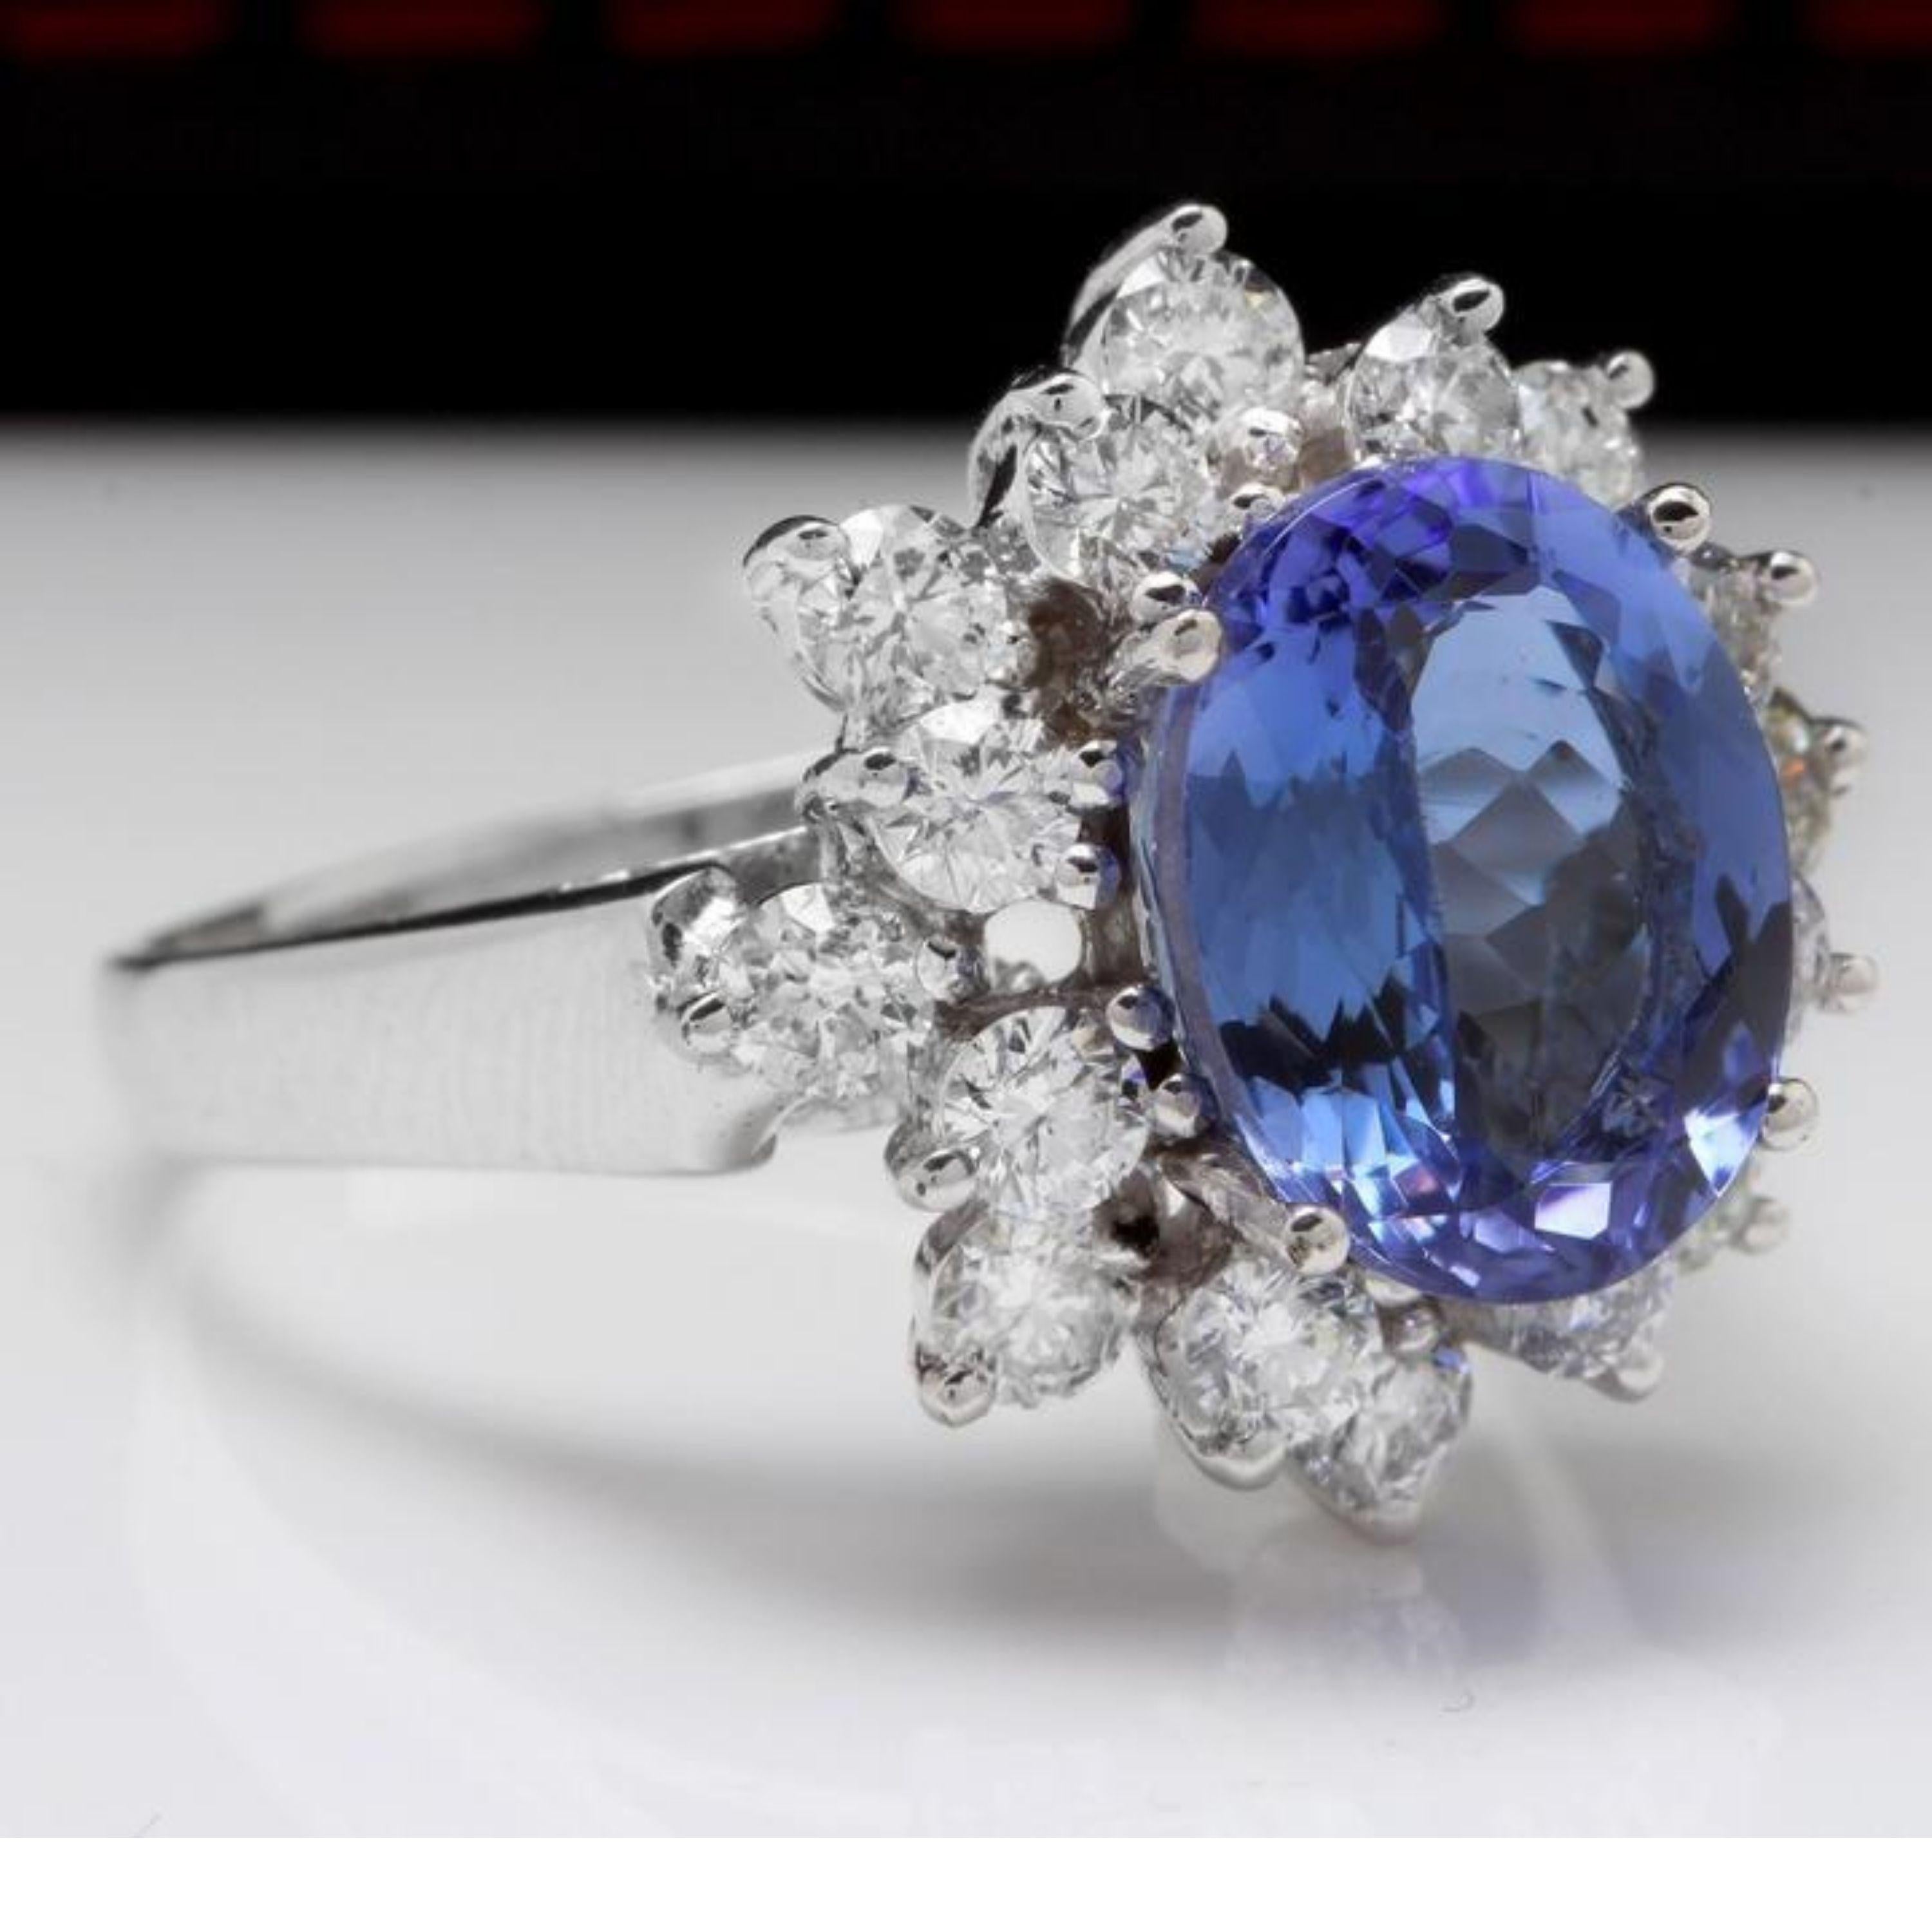 4.07 Carats Natural Very Nice Looking Tanzanite and Diamond 14K Solid White Gold Ring

Total Natural Oval Cut Tanzanite Weight is: Approx. 2.82 Carats

Tanzanite Treatment: Heat

Natural Round Diamonds Weight: Approx. 1.25 Carats (color G-H /